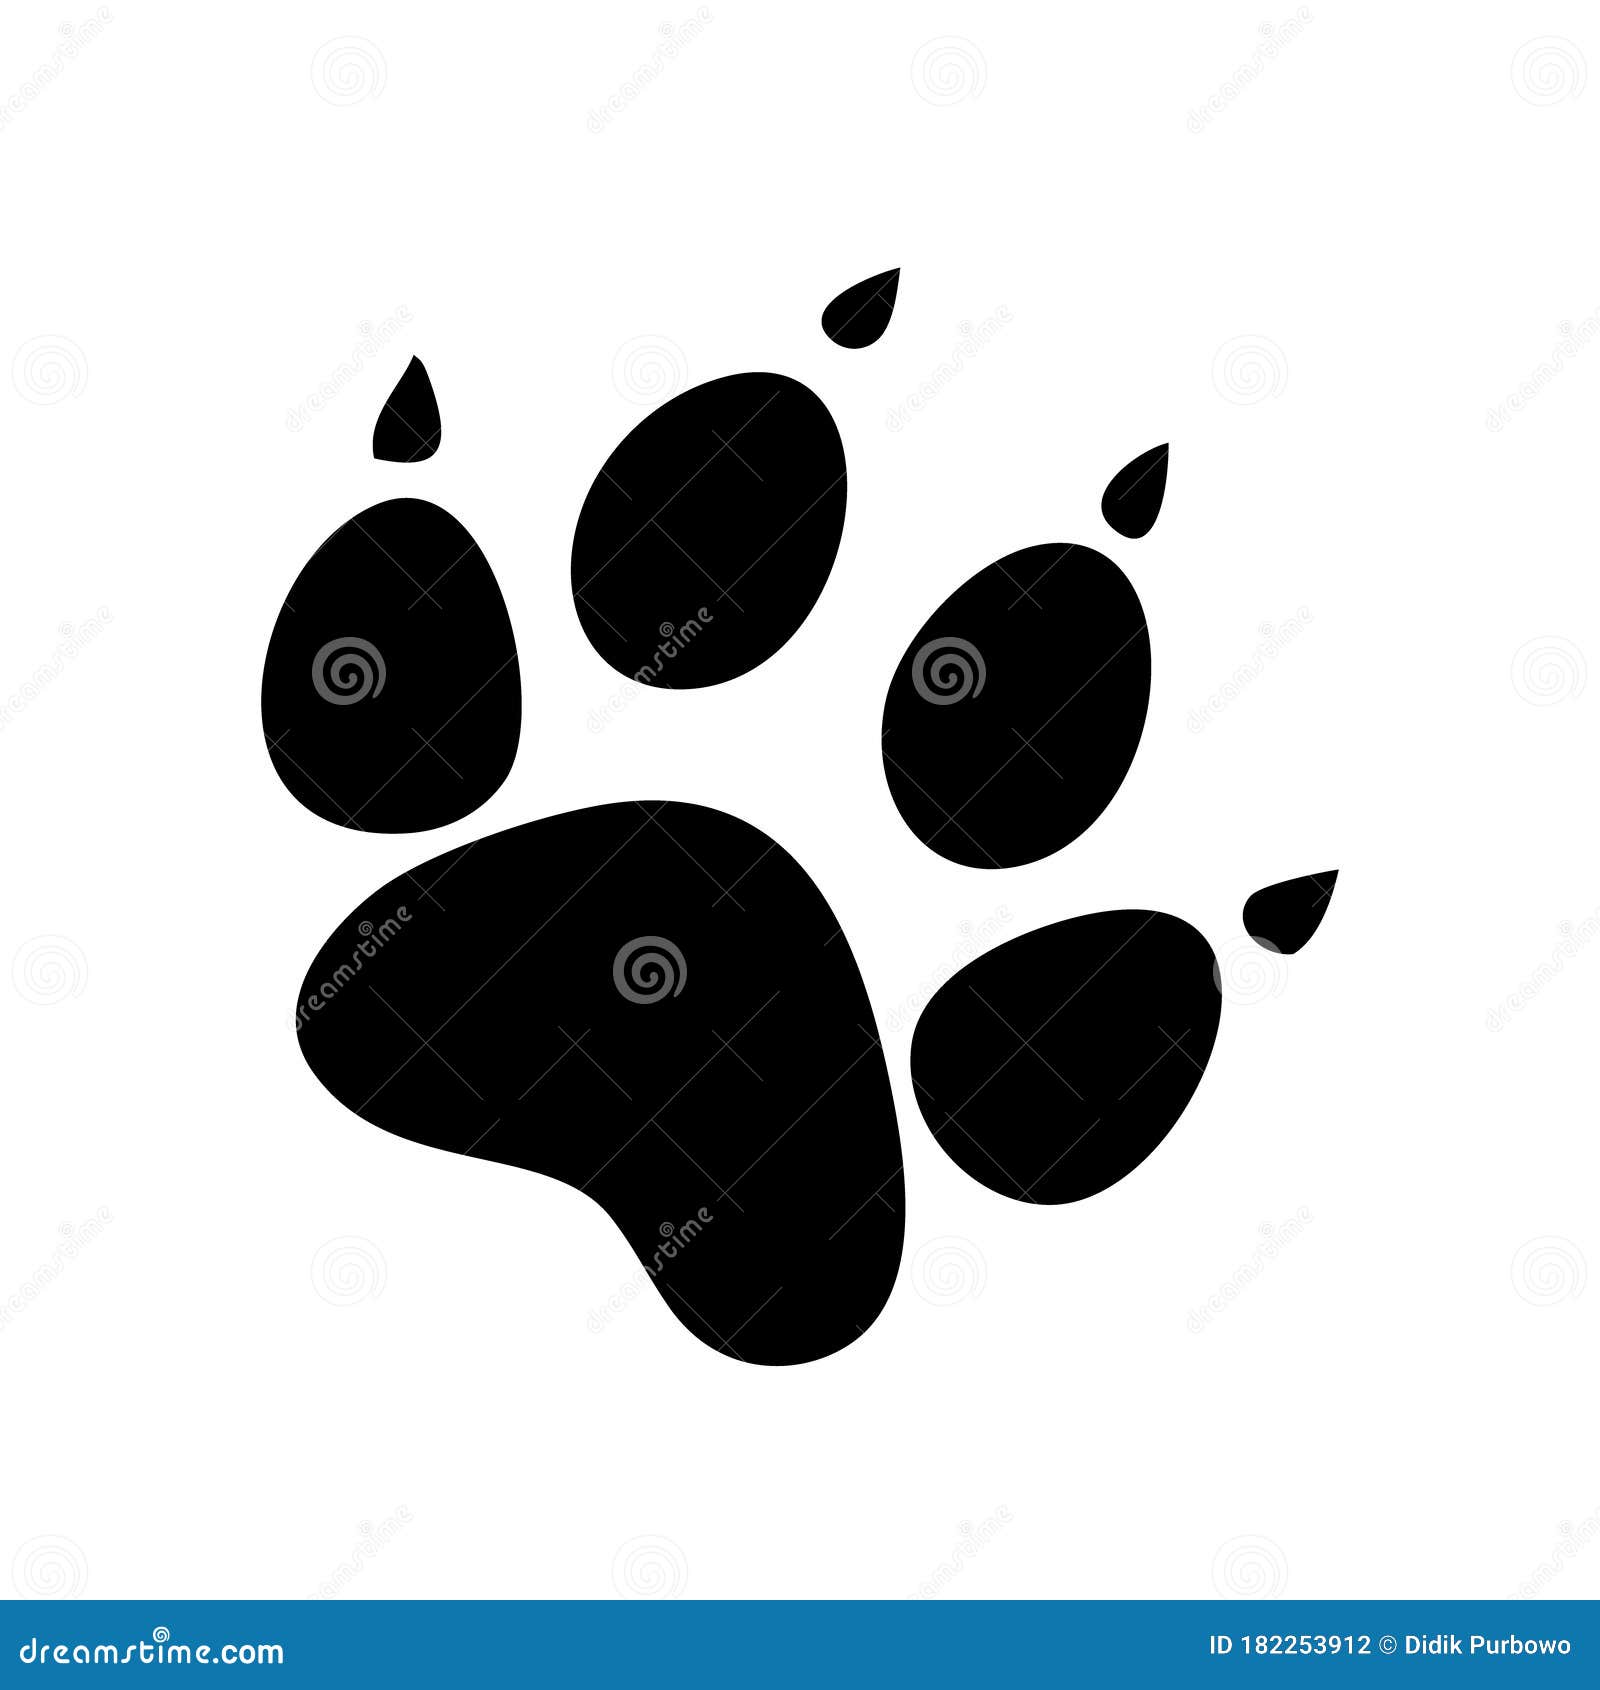 Paw Print on White Background. Flat Style. Dog, Cat, Beer Paw Stock Vector - Illustration of colorful, 182253912